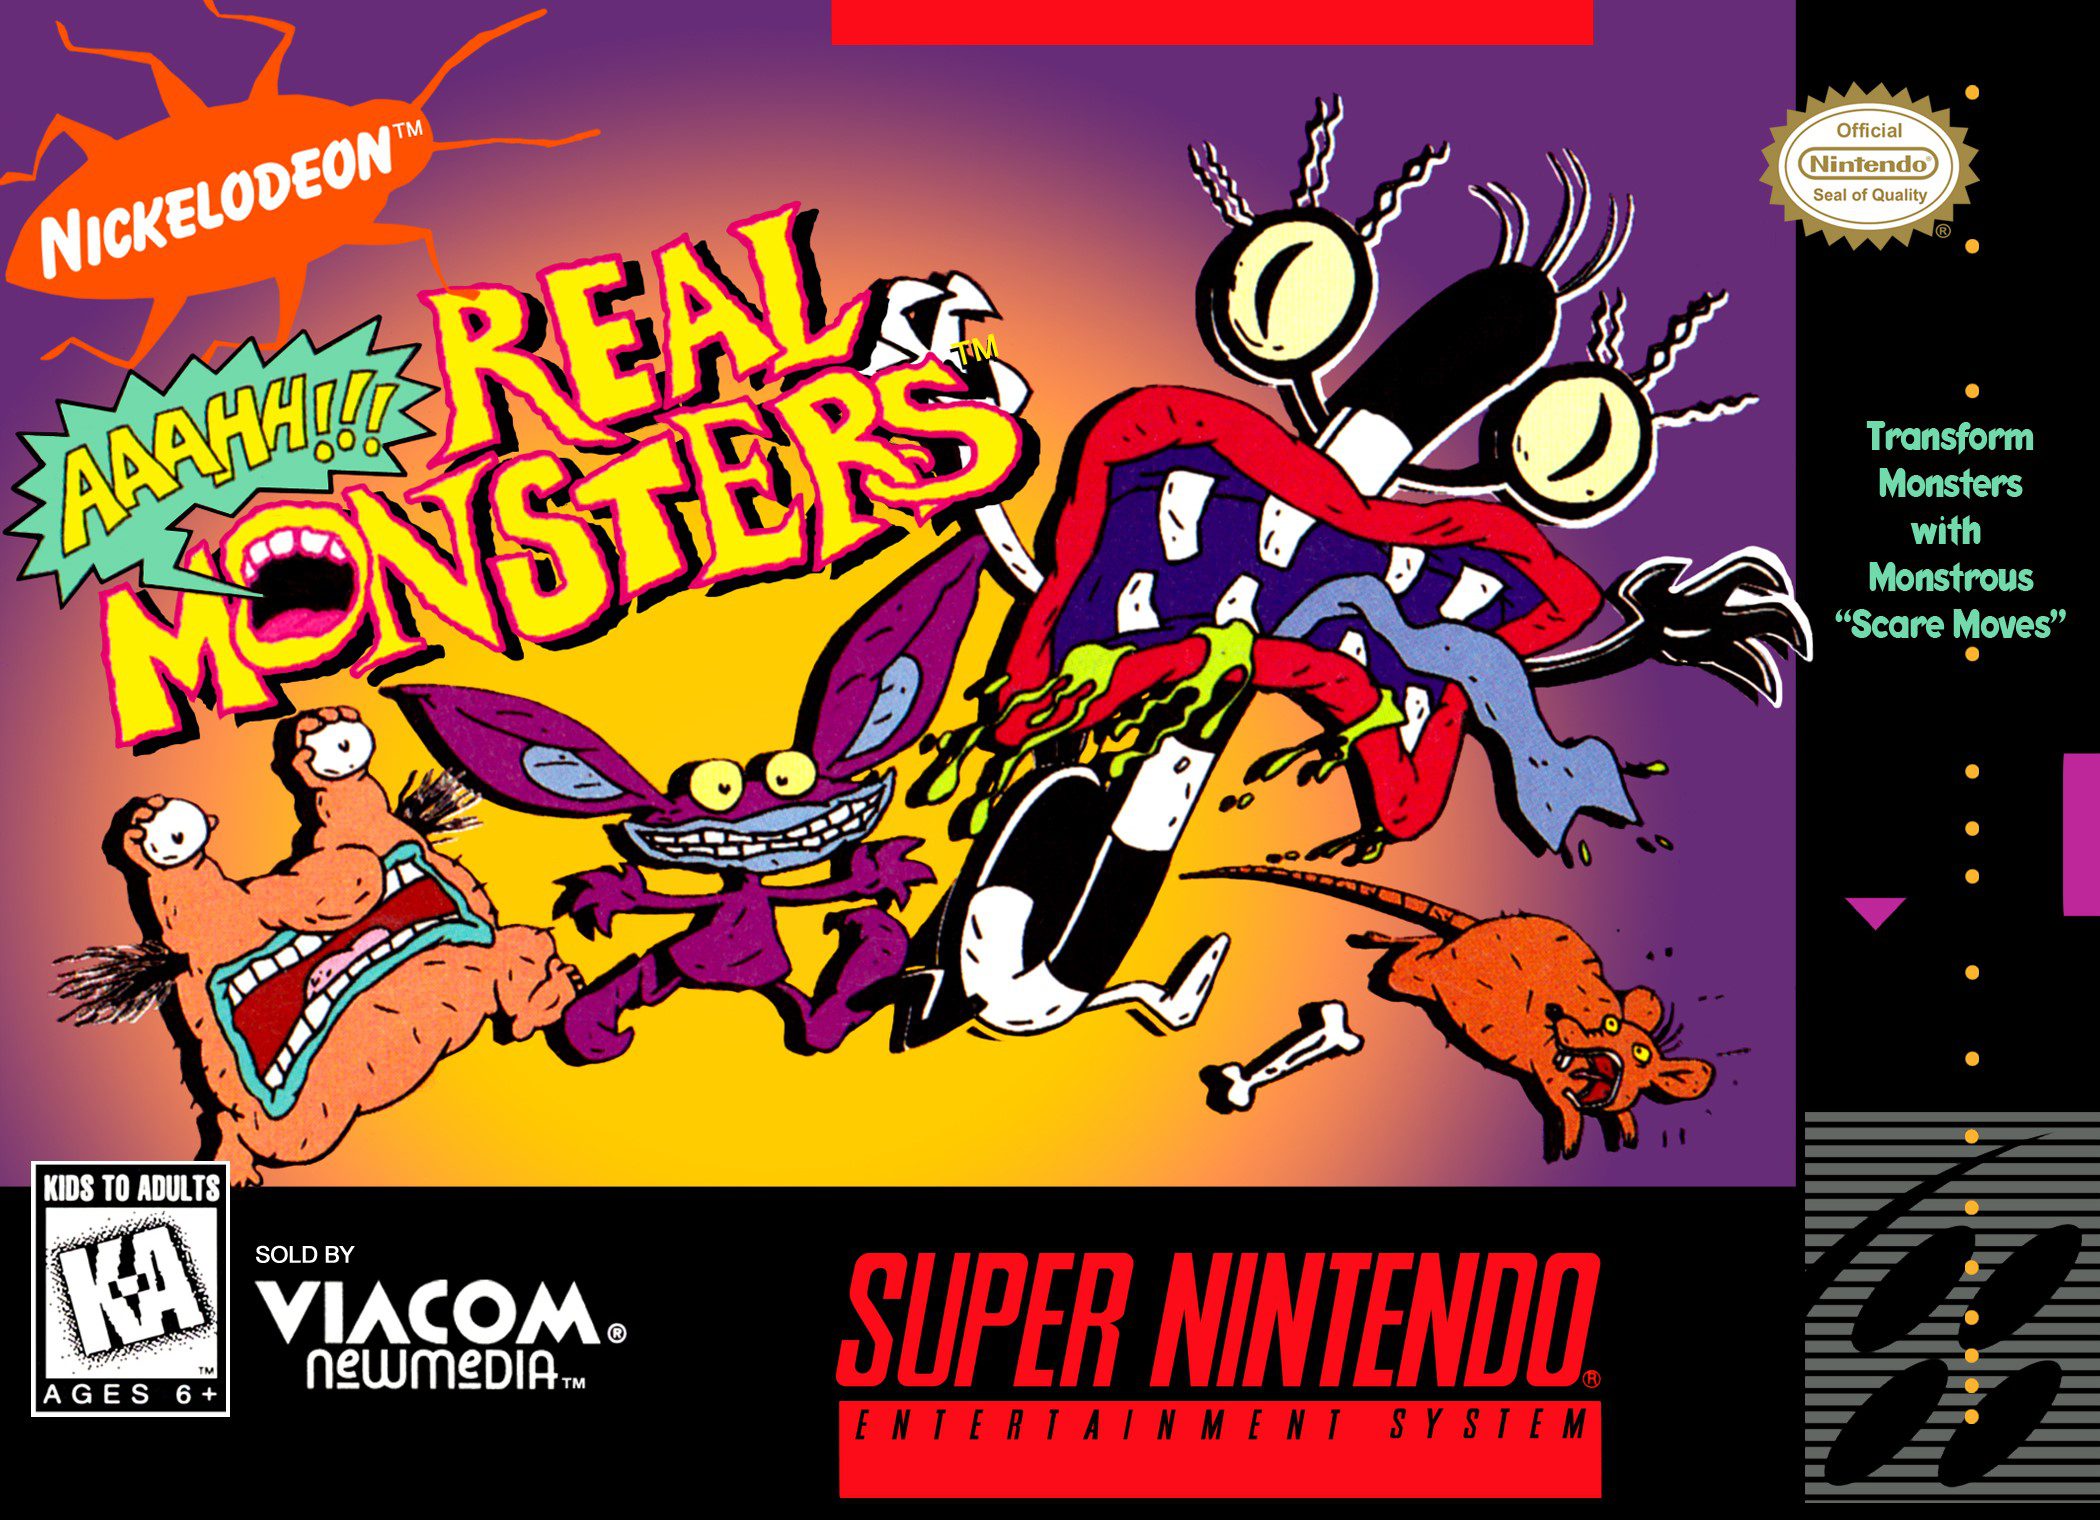 Nickelodeon Aahh!!! Real Monsters for Super Nintendo Entertainment System (SNES)